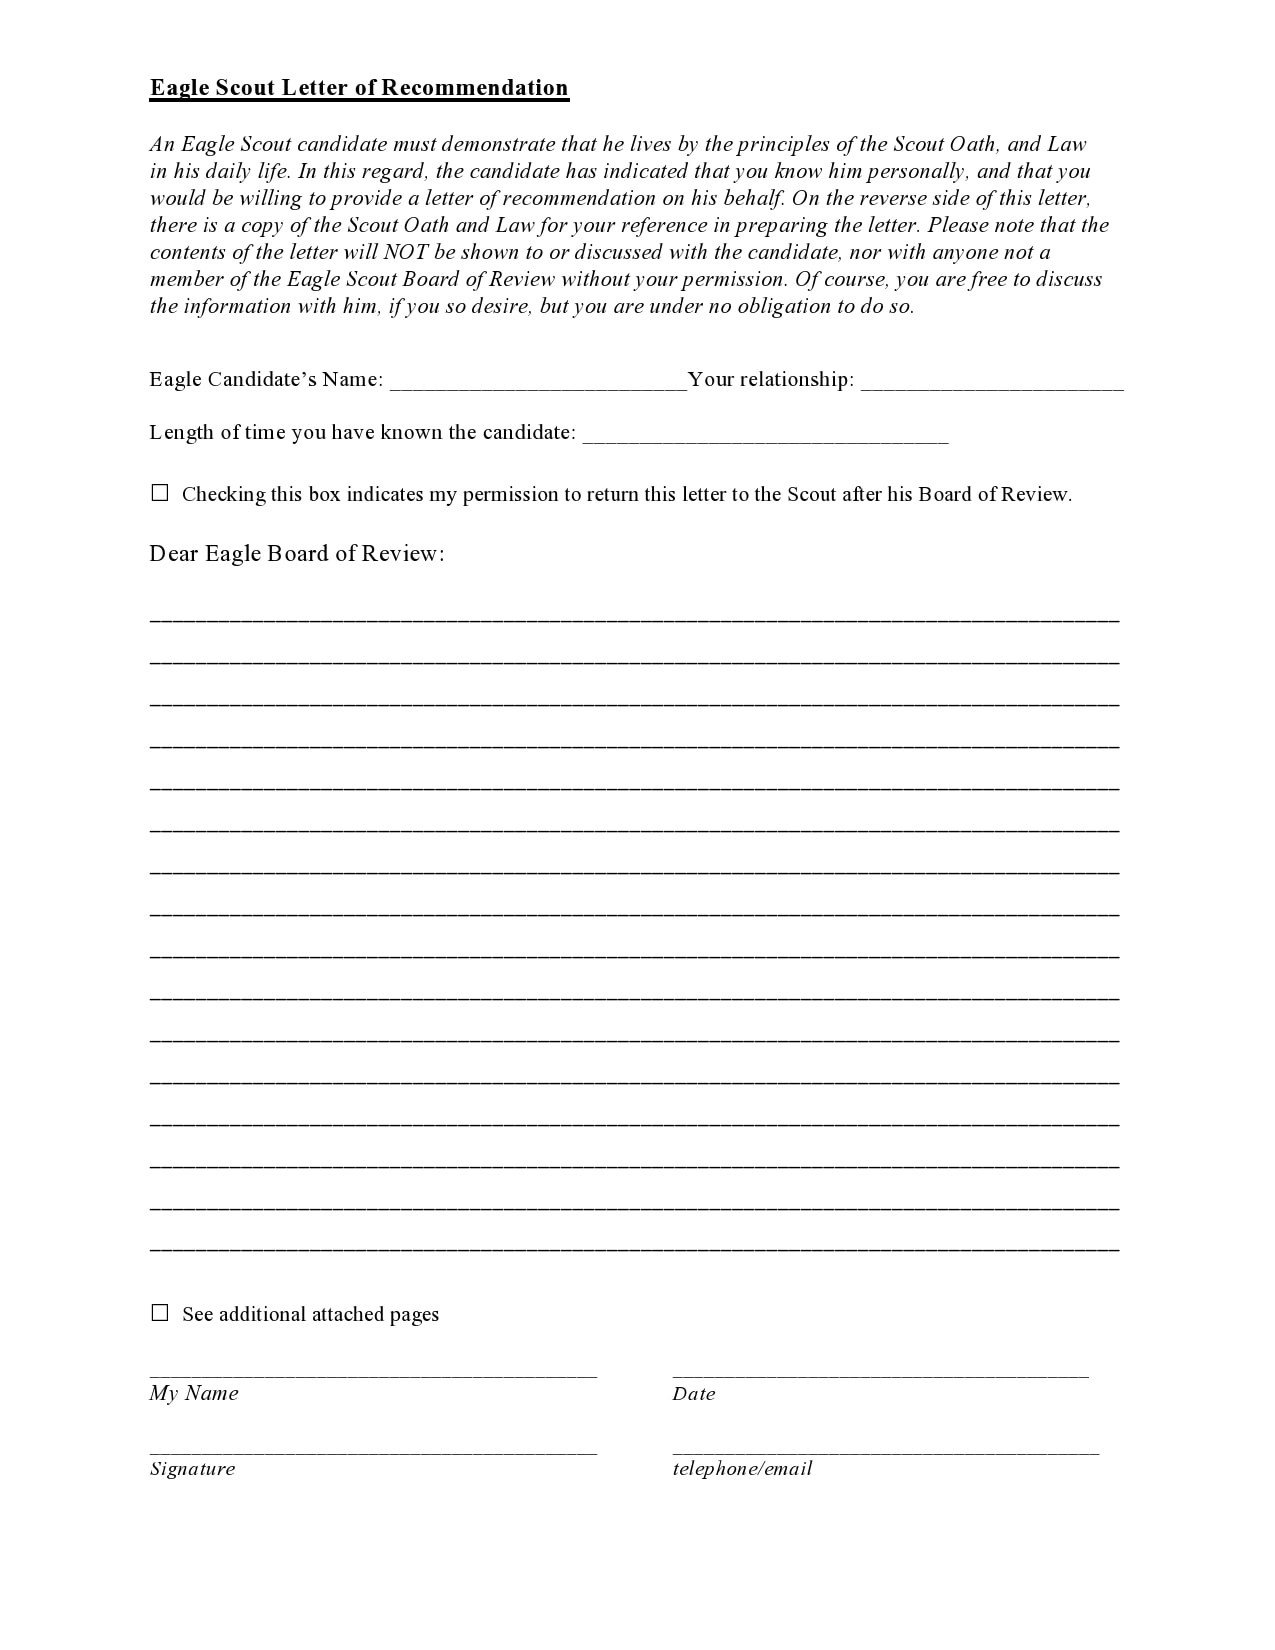 25 Eagle Scout Recommendation Letter Examples inside Letter Of Recommendation For Eagle Scout Template